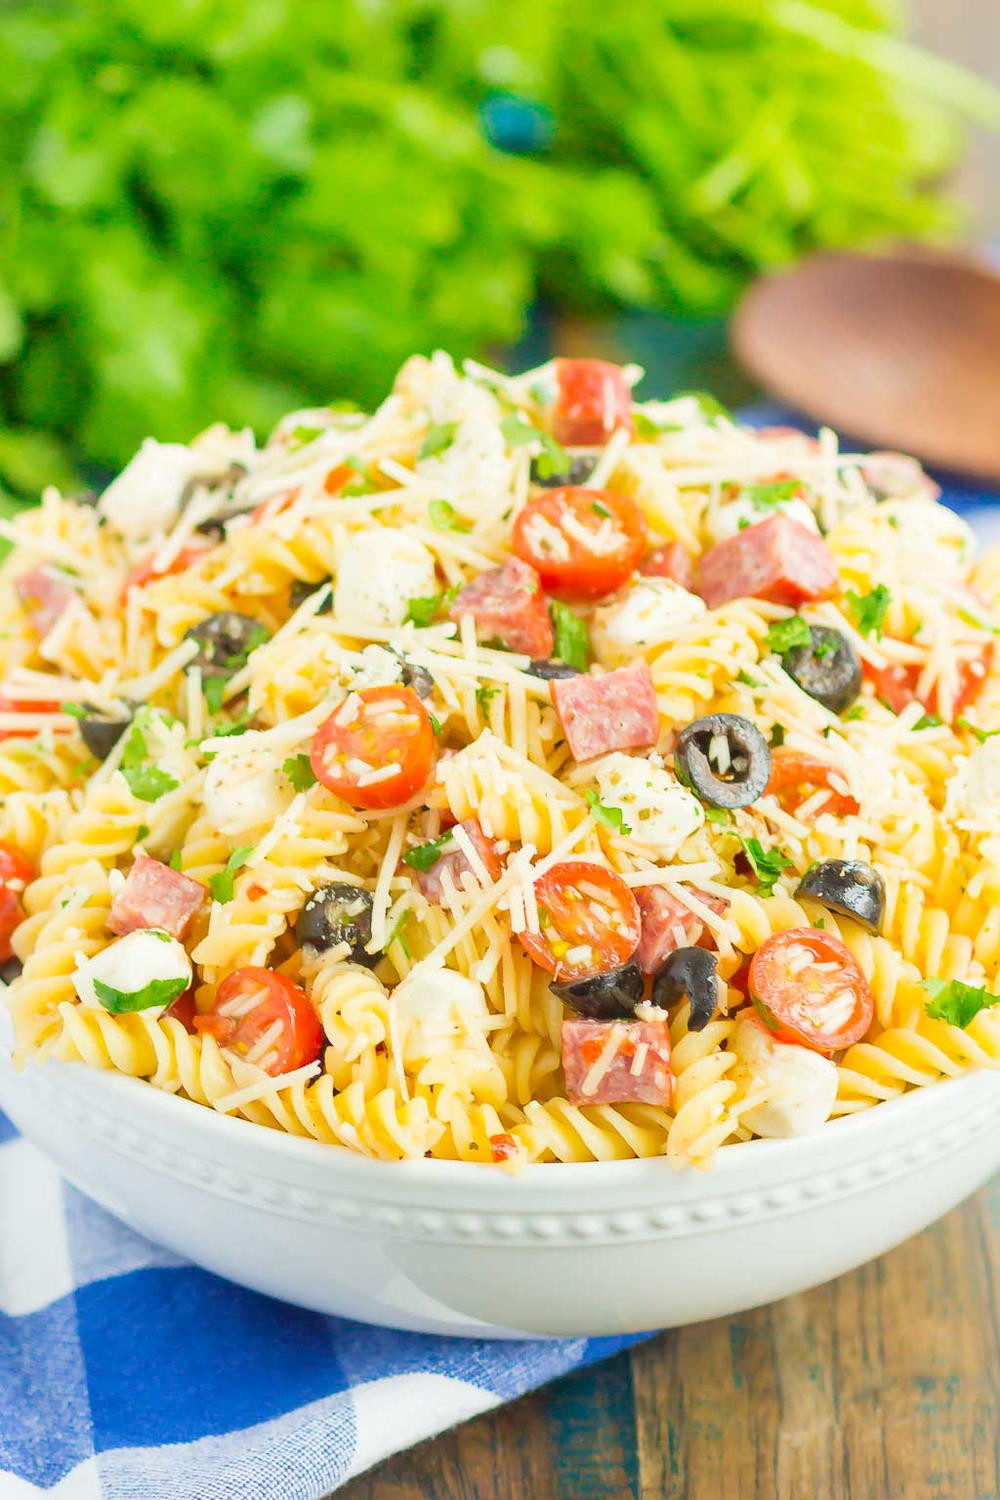 Most Popular Simply Pasta Salad Ever